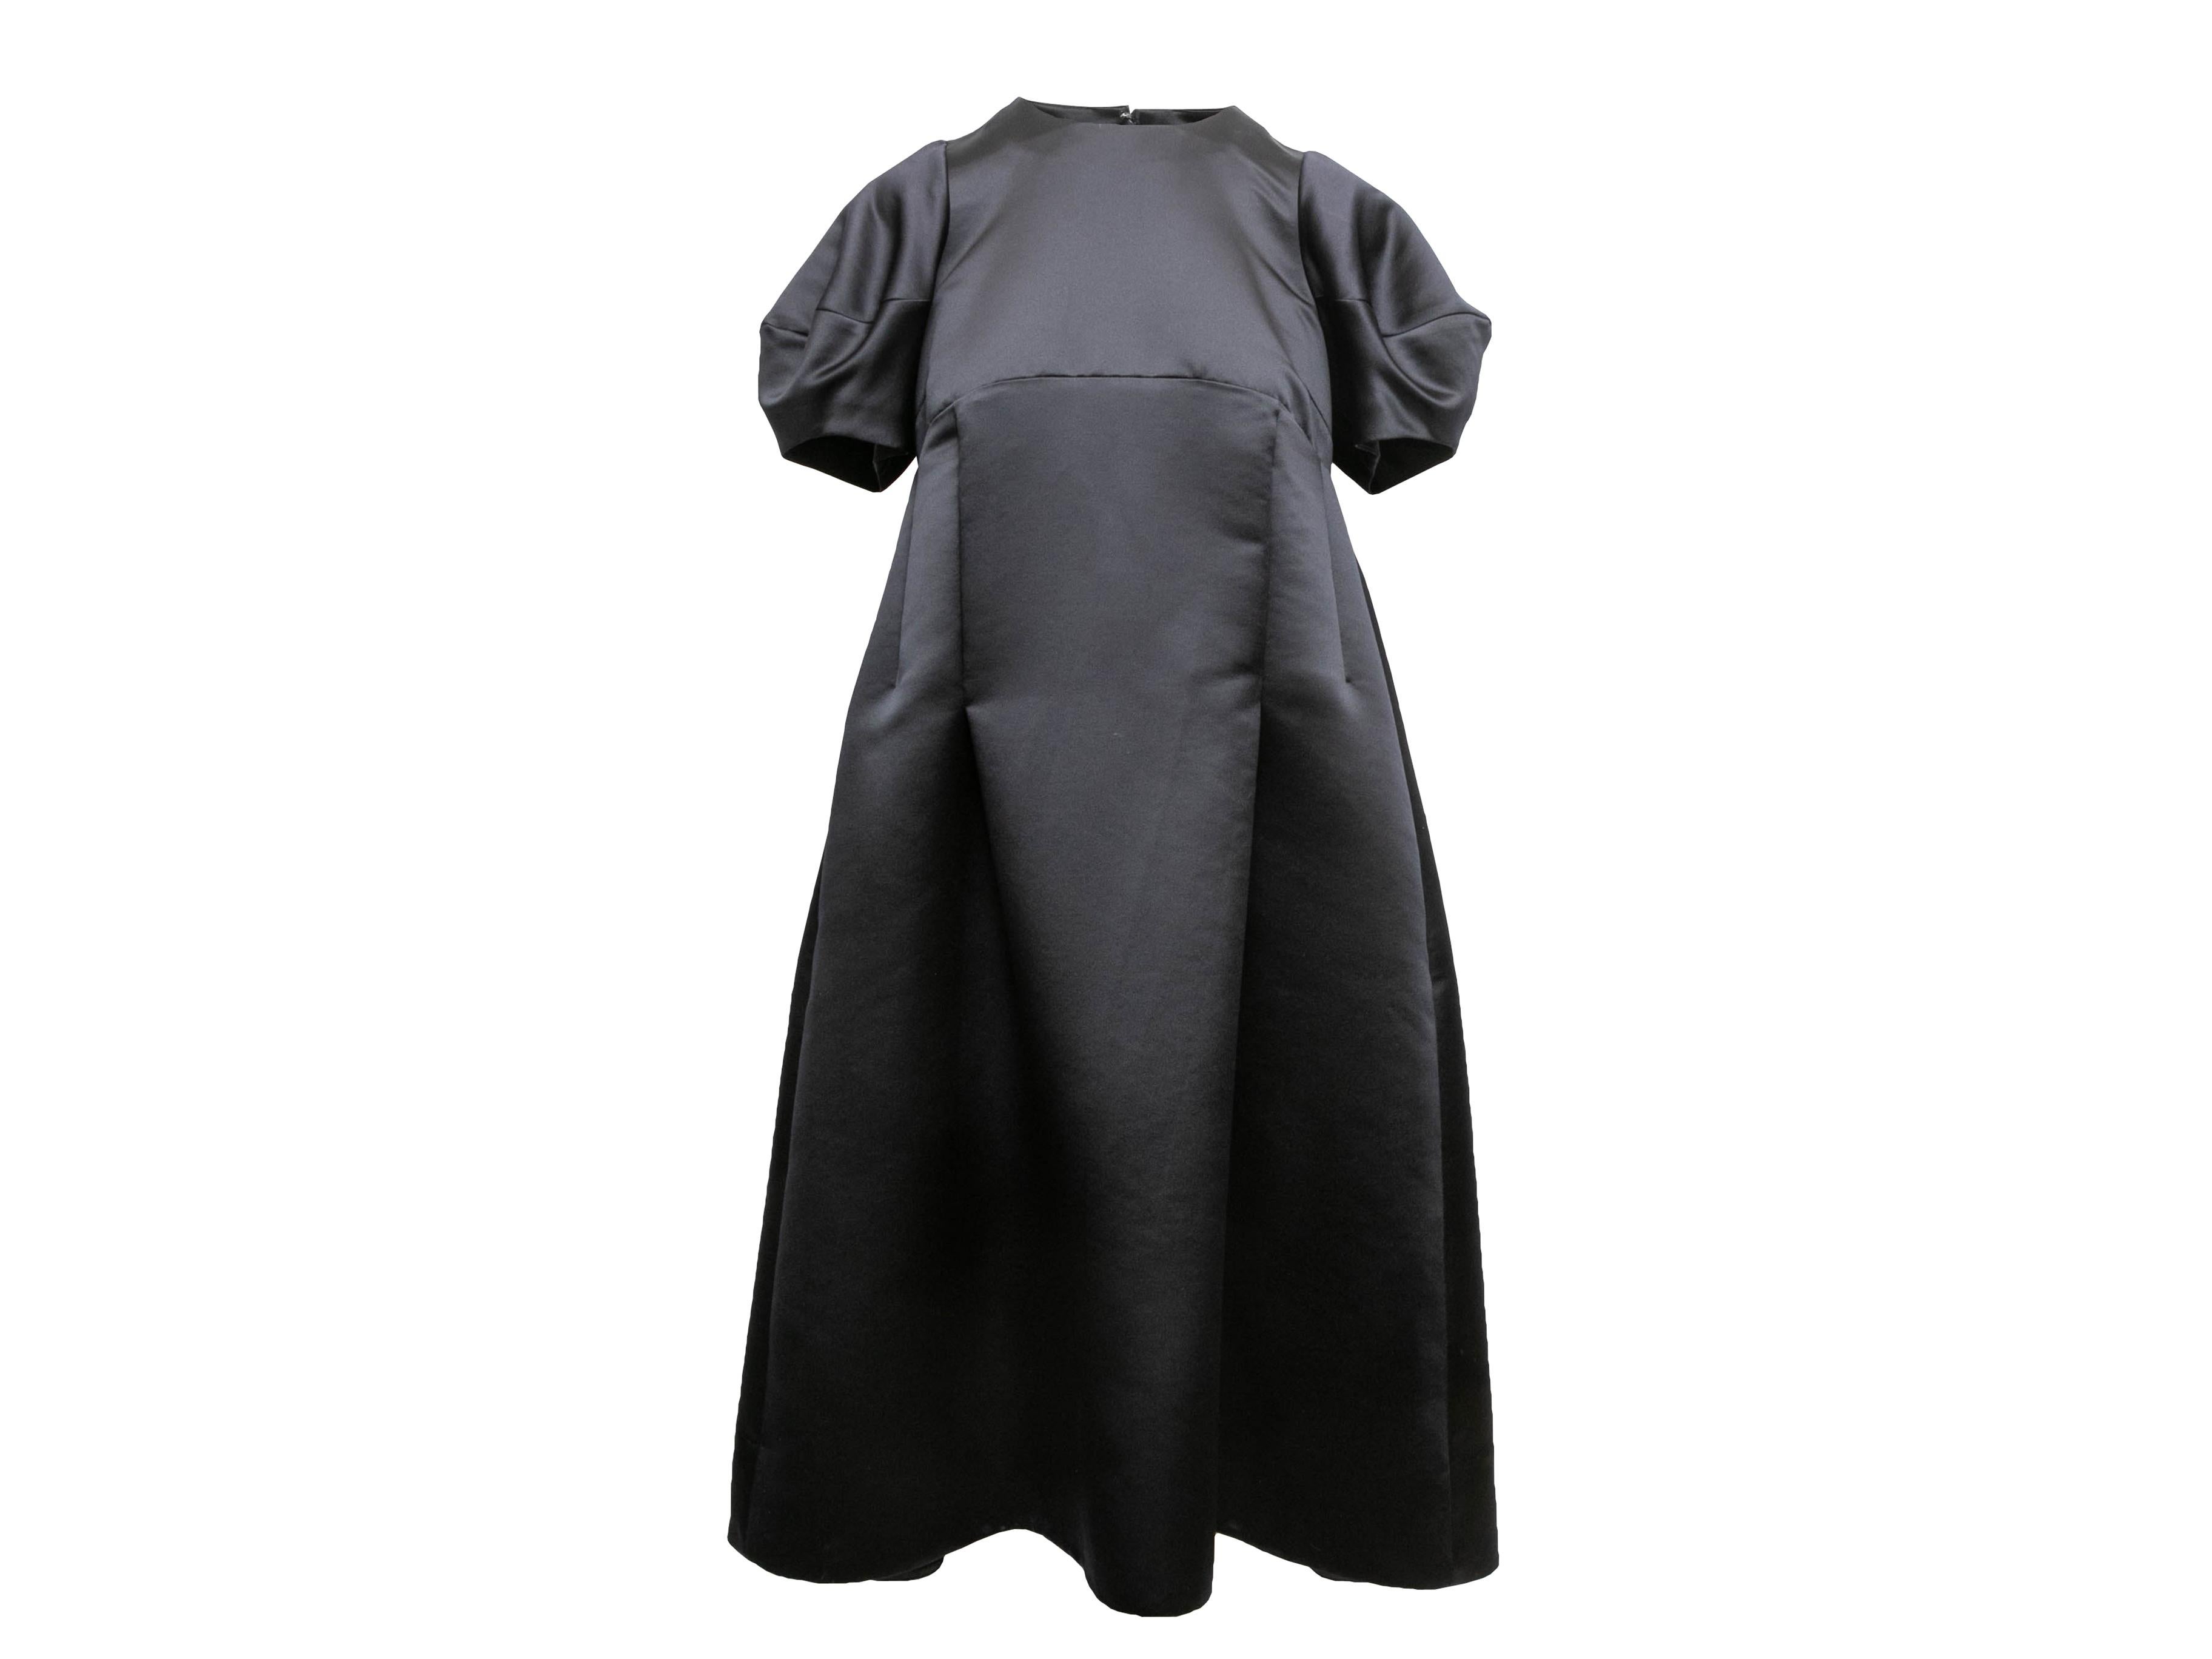 Black satin short puff sleeve dress by Comme Des Garcons. Crew neck. Zip closure at back. 34